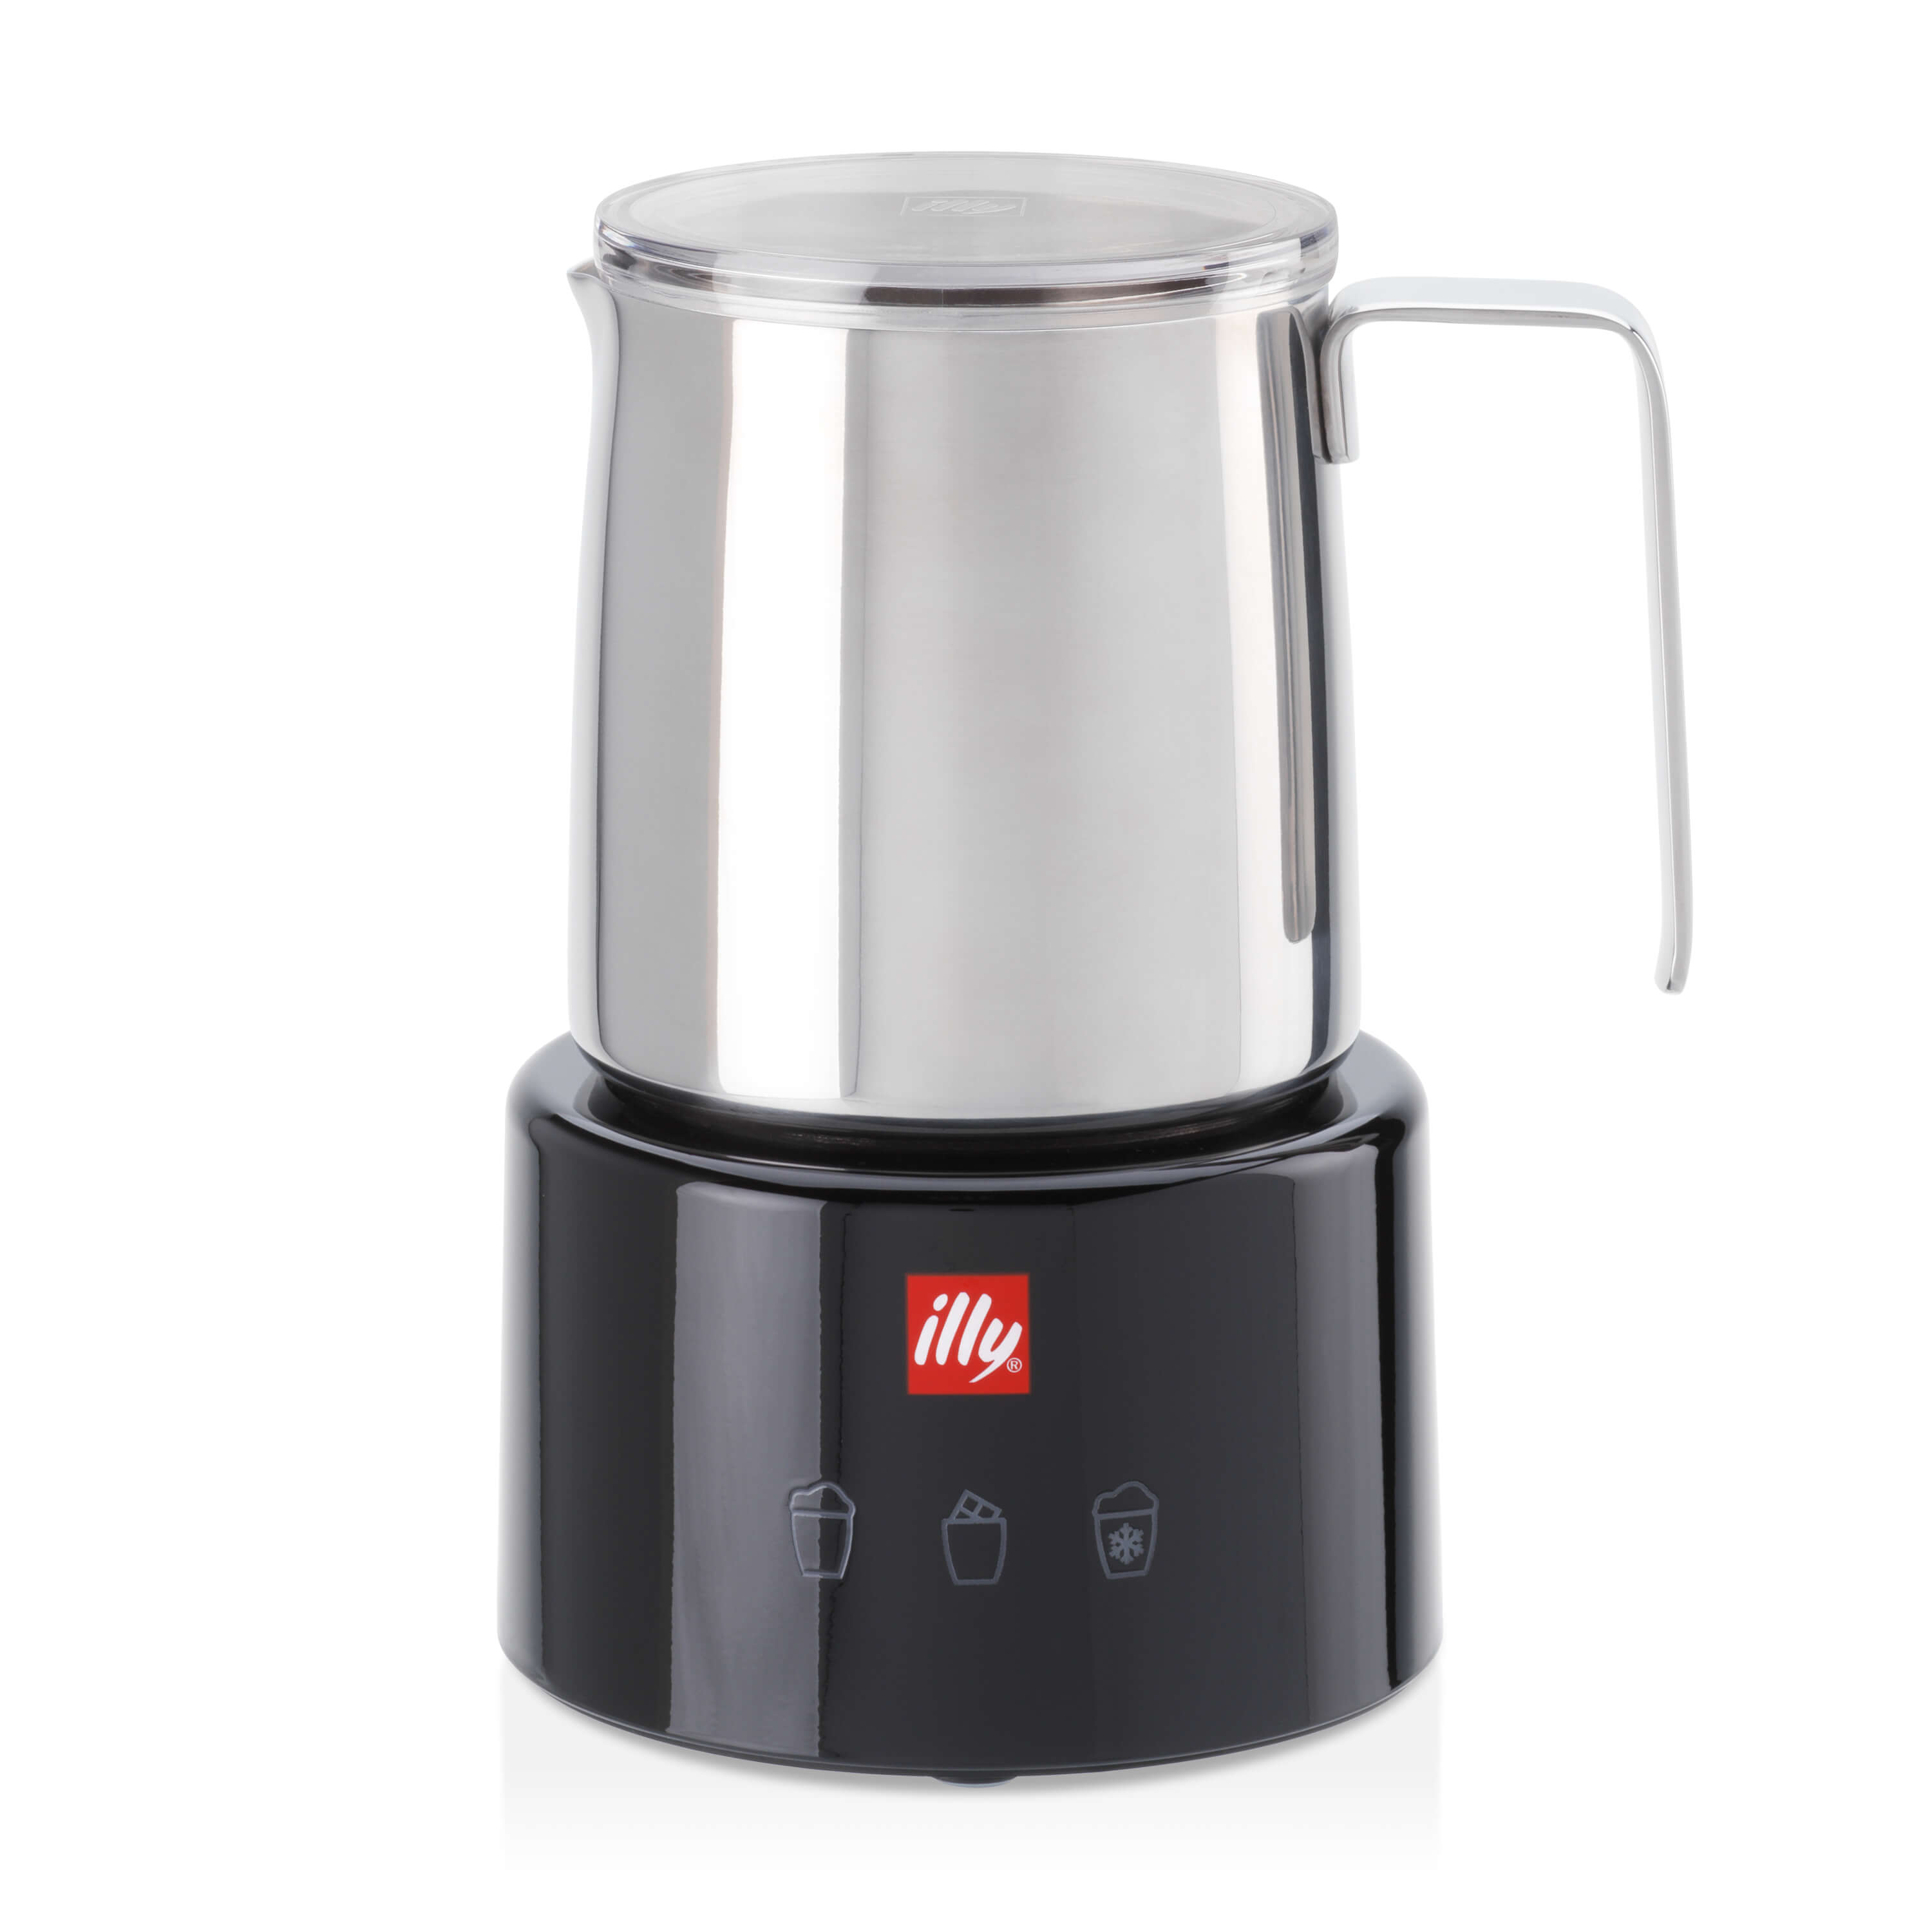 illy Electric Milk Frother Black, Coffee Accessories, 02-07-0103